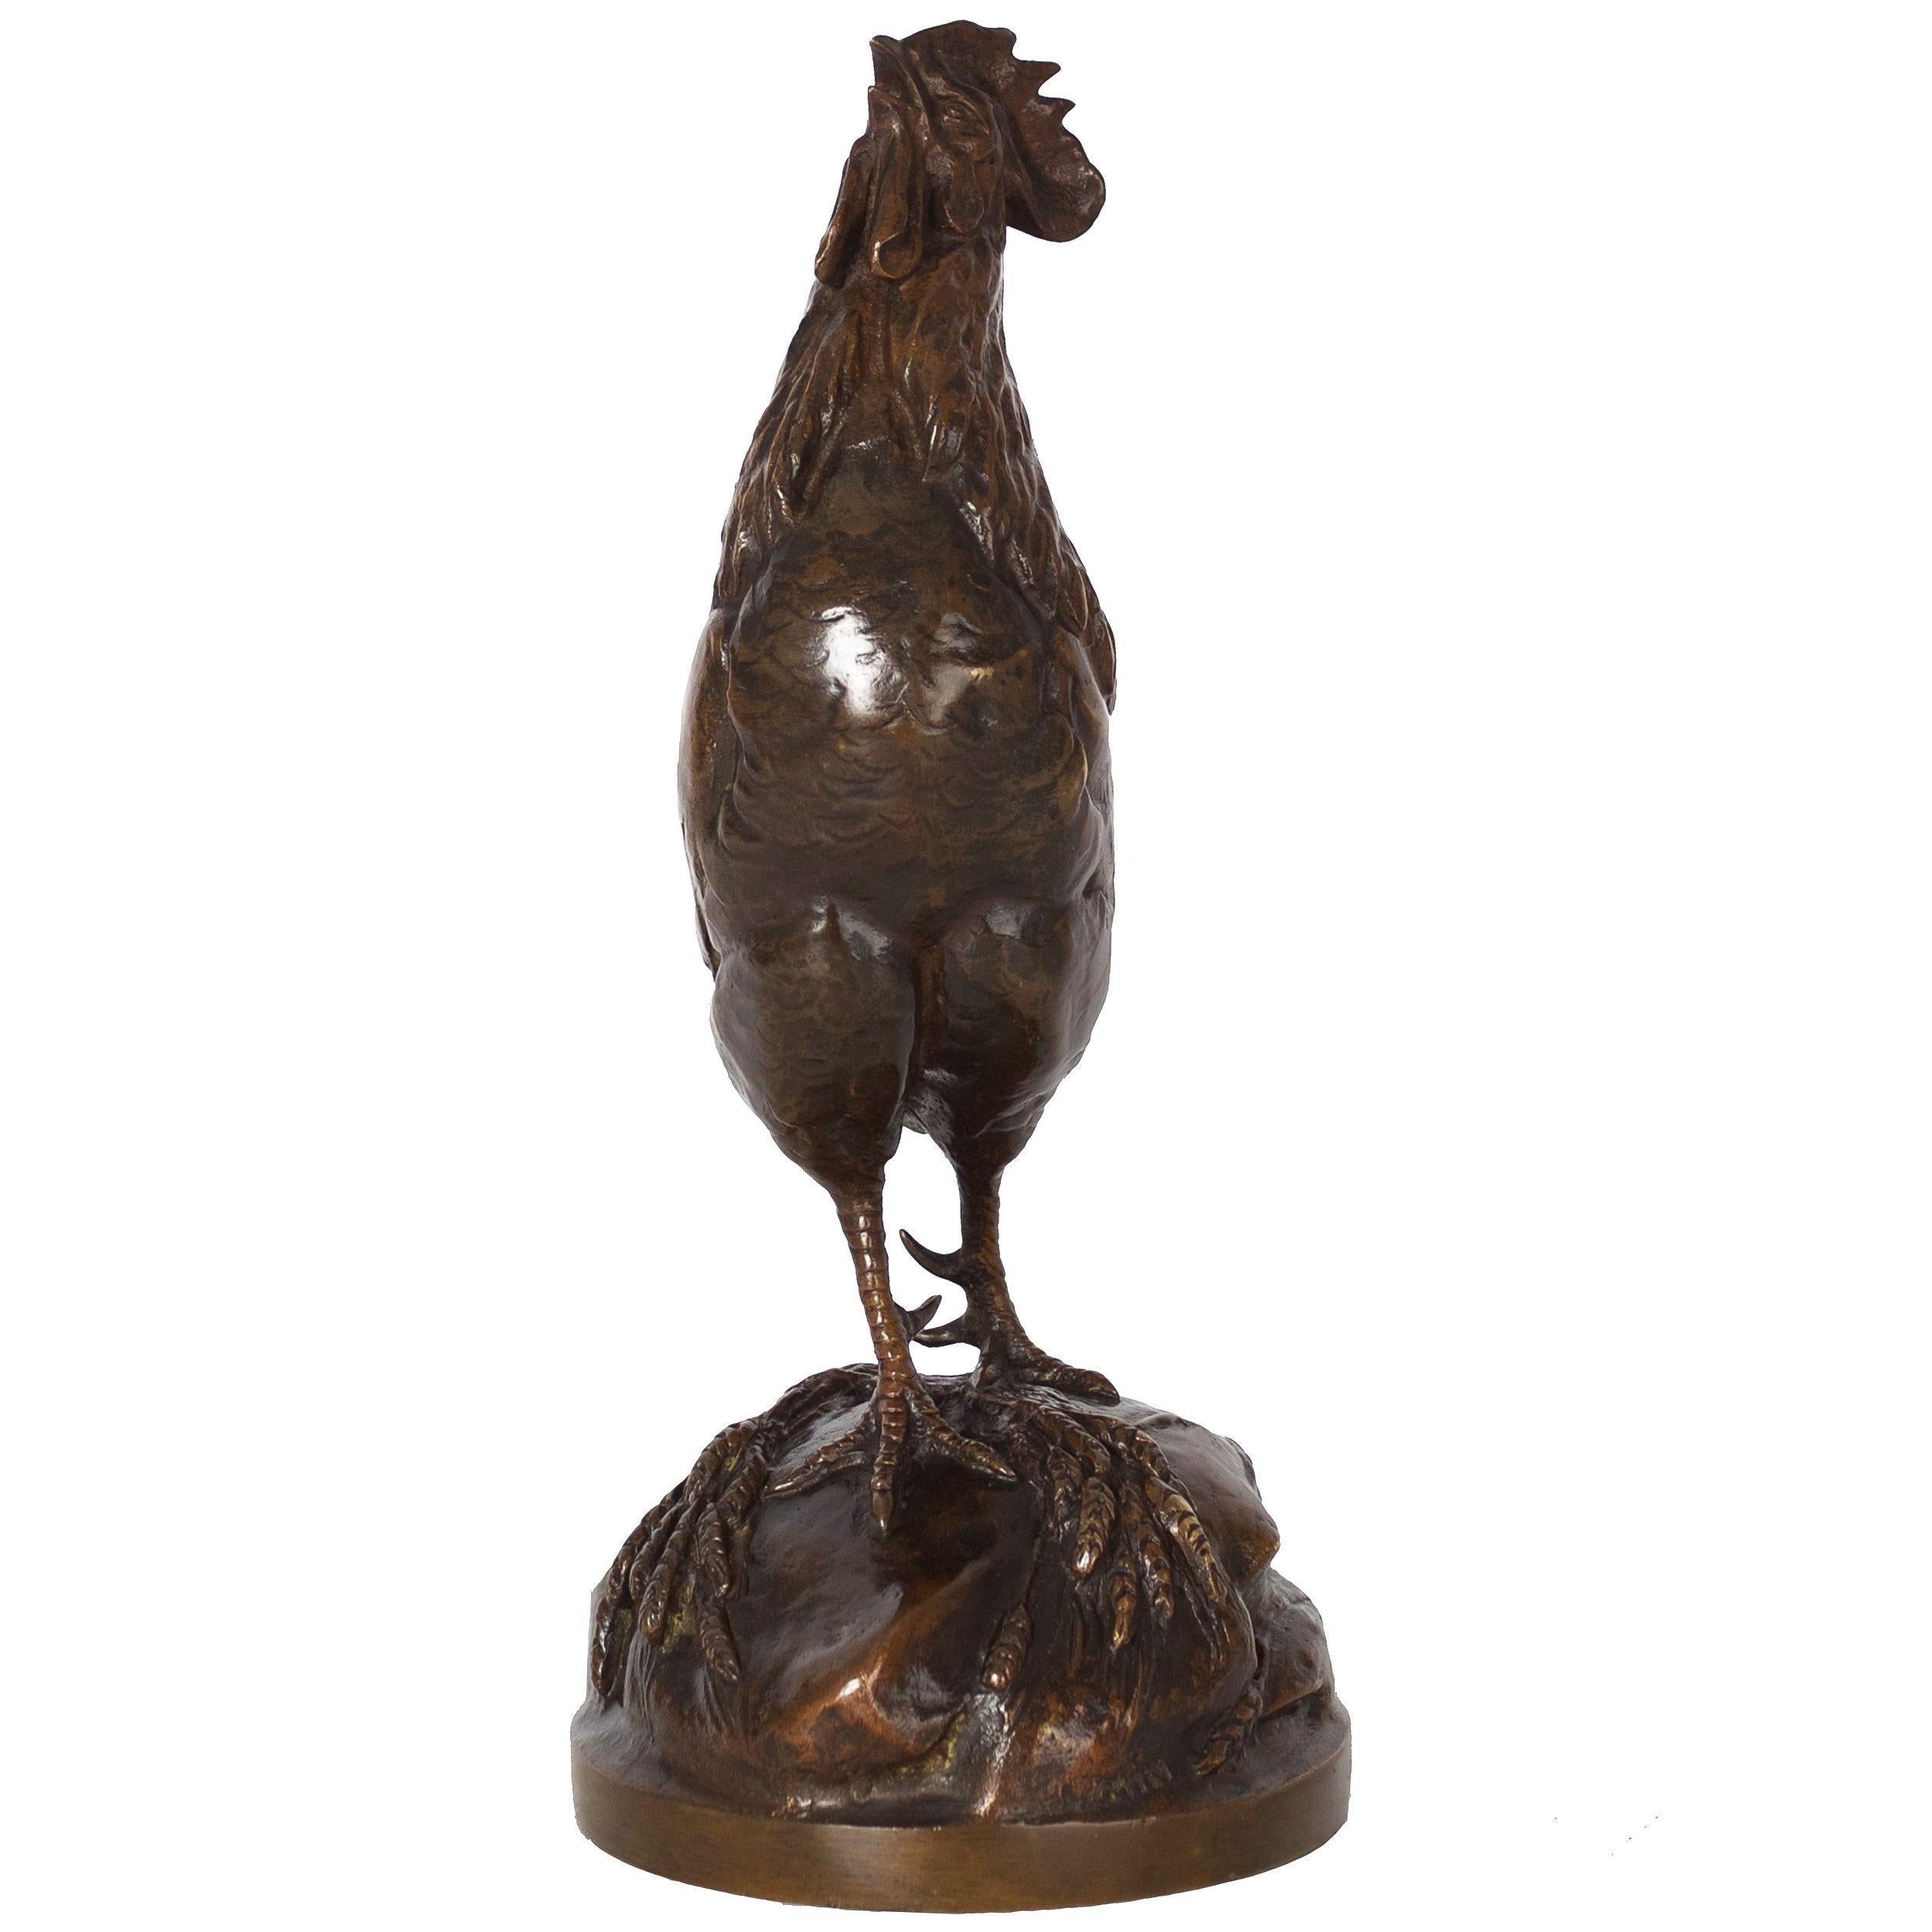 Romantic French Antique Bronze Sculpture of Rooster by Auguste Cain & Susse Freres